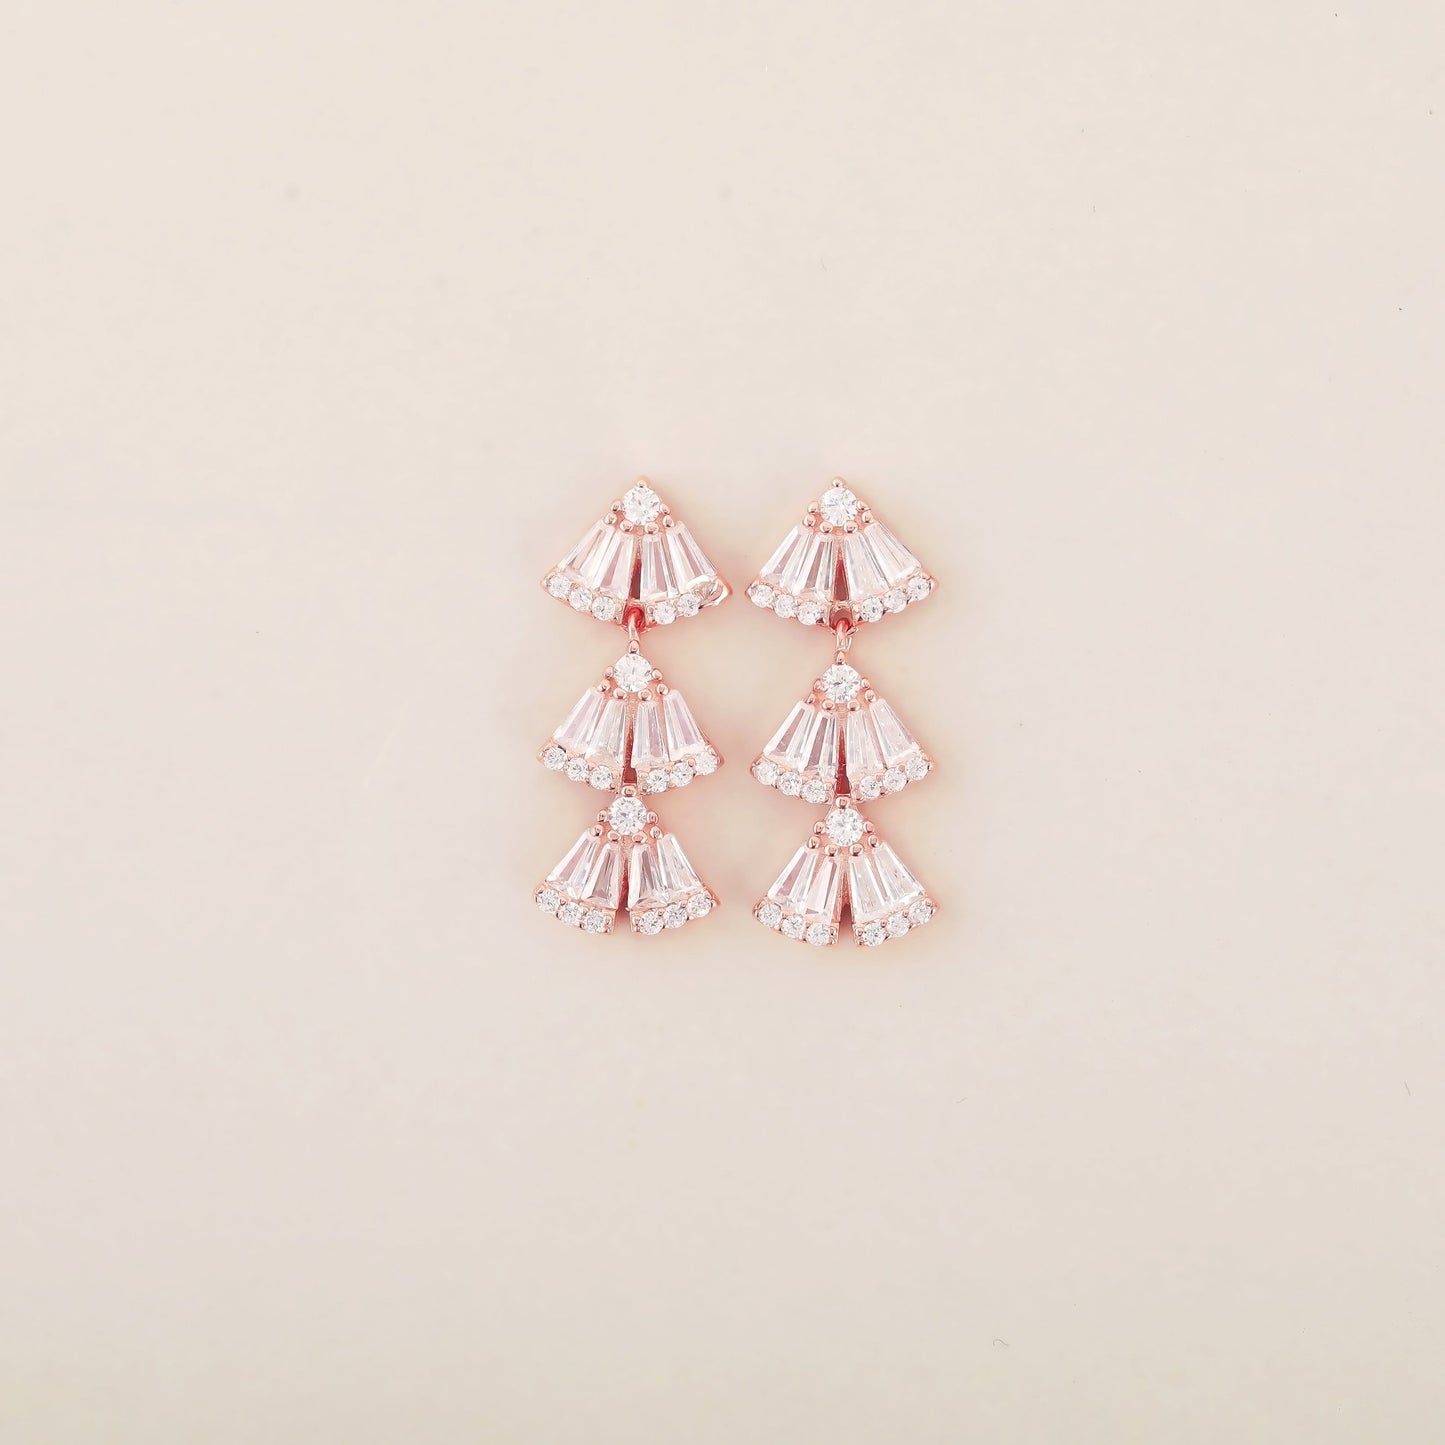 Baguette Brilliance: Rose Gold Earrings with Triangular Sterling Silver Studs Adorned with Baguette CZ Stones - Shining Silver.in